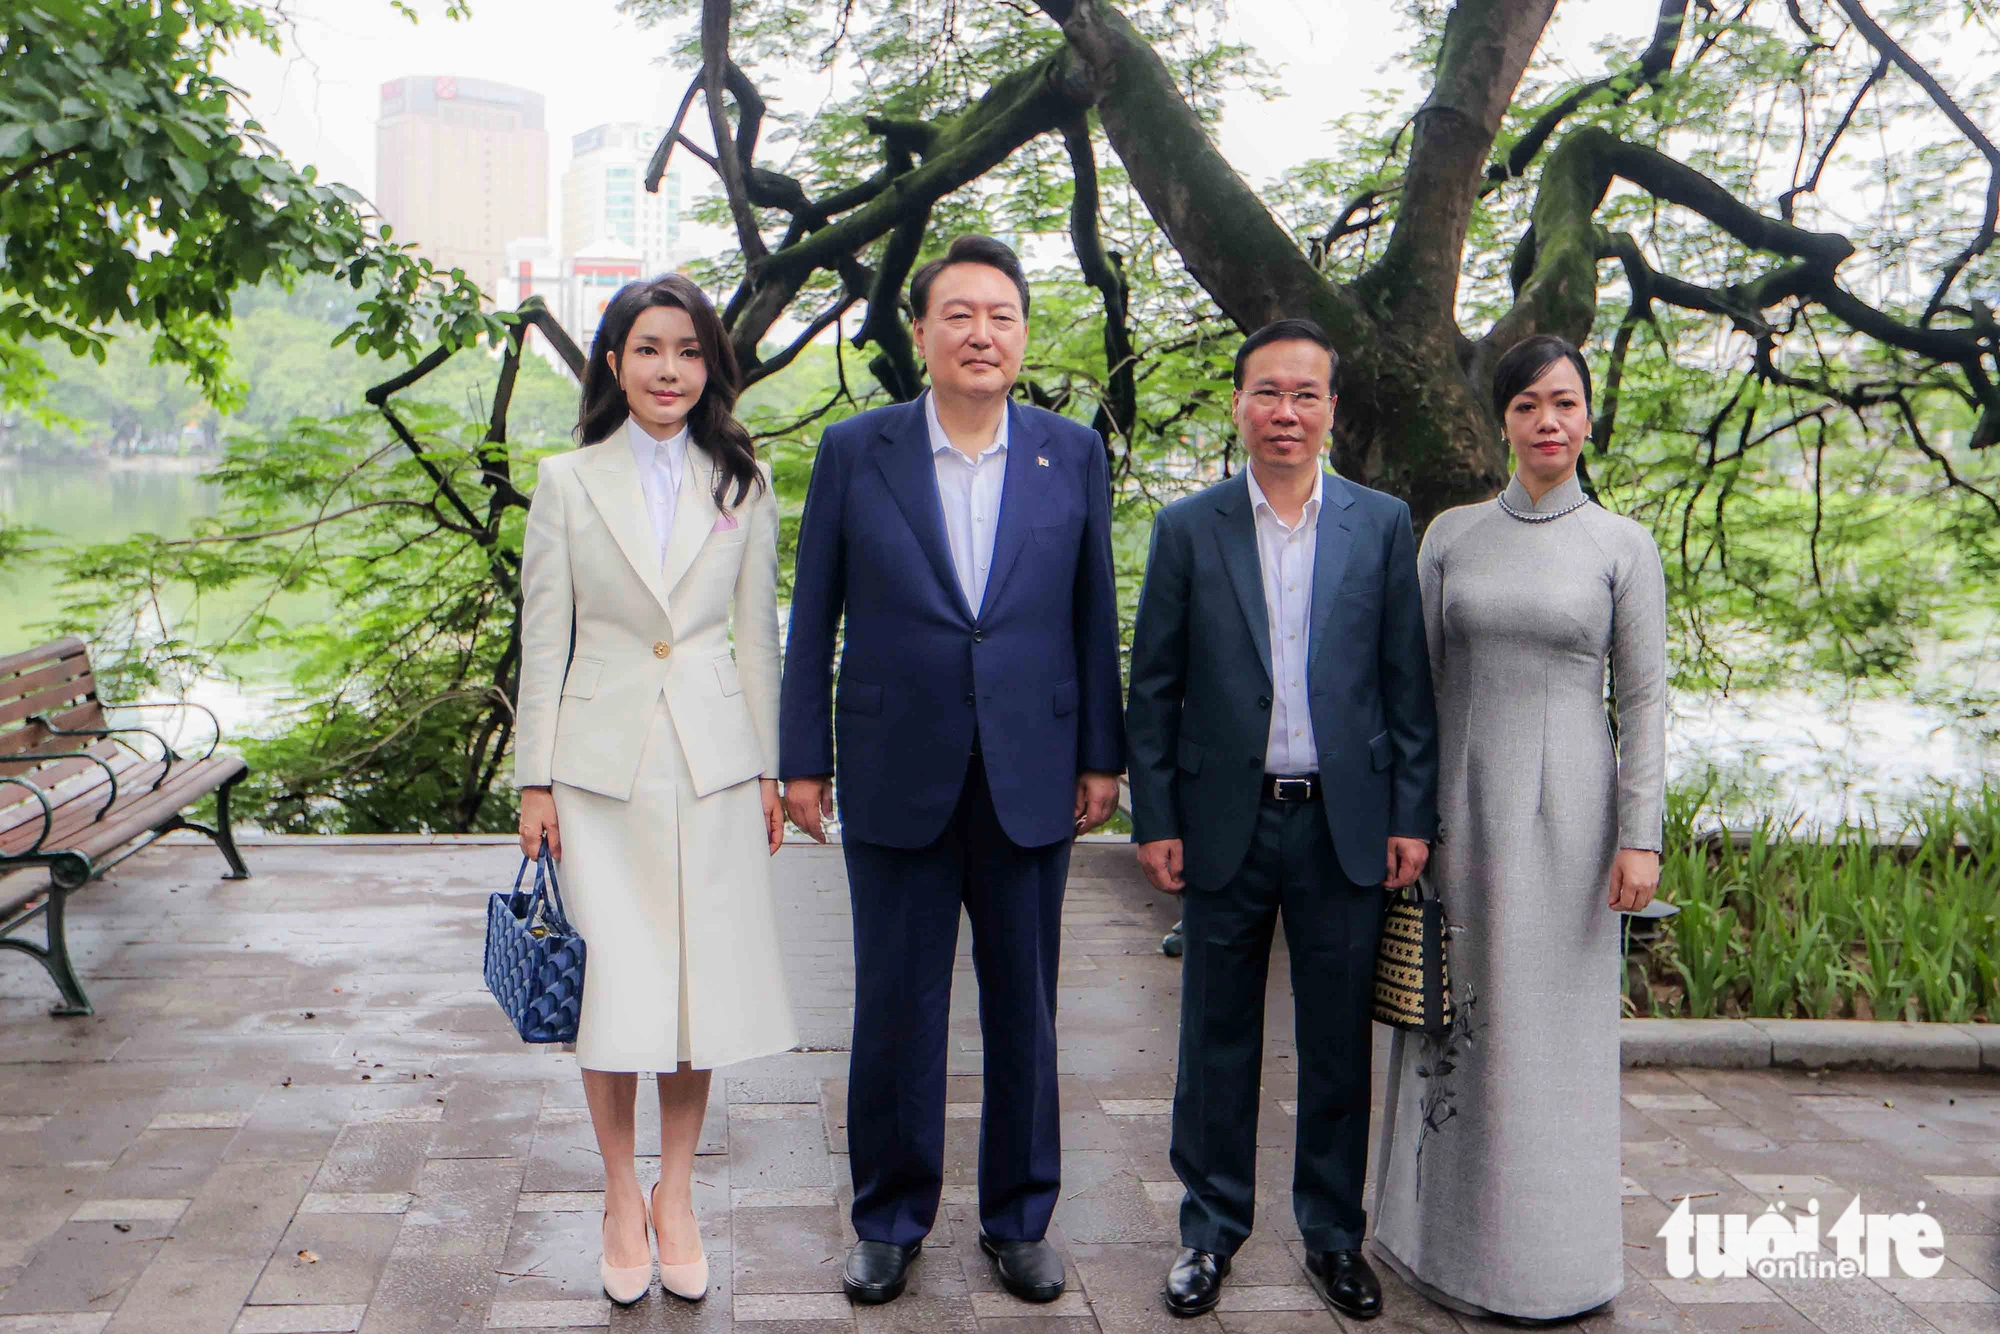 Vietnamese State President Vo Van Thuong (R, 2nd), his South Korean counterpart Yoon Suk Yeol (L, 2nd) and their spouses pose for a group photo at Hoan Kiem Lake in Hanoi on June 24, 2023. Photo: Nguyen Khanh / Tuoi Tre